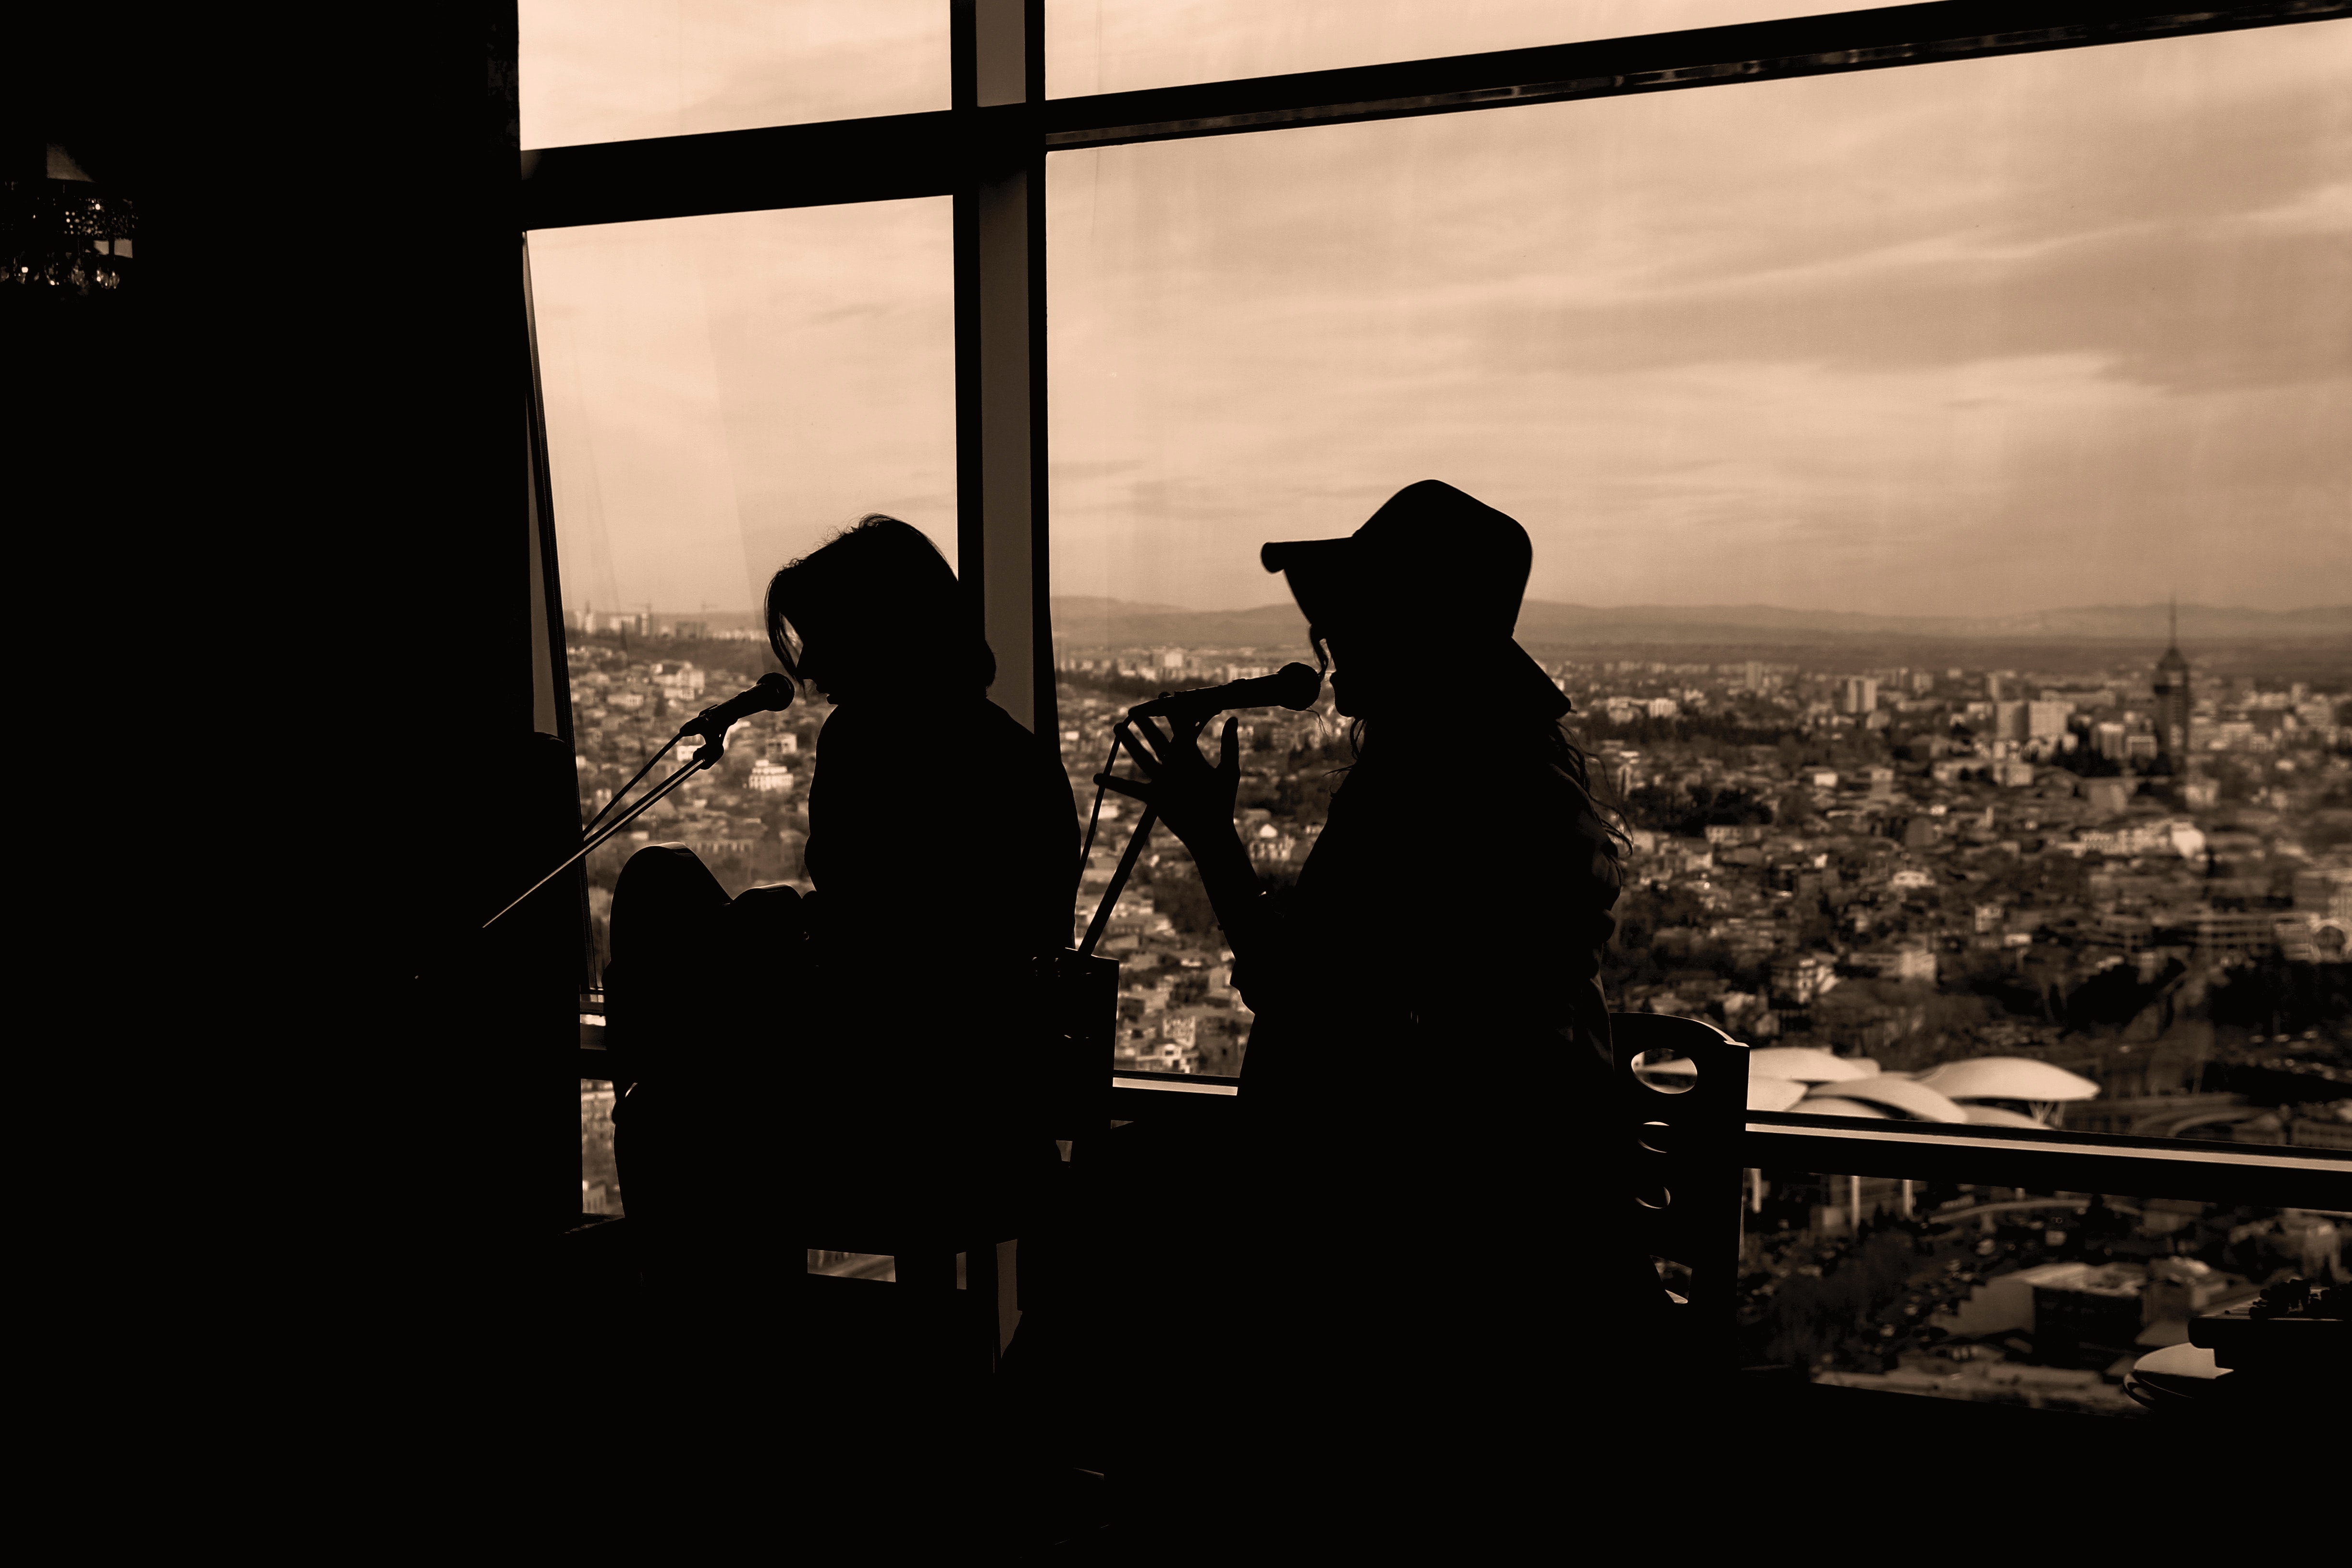 Silhouette of two women singing in sepia photography